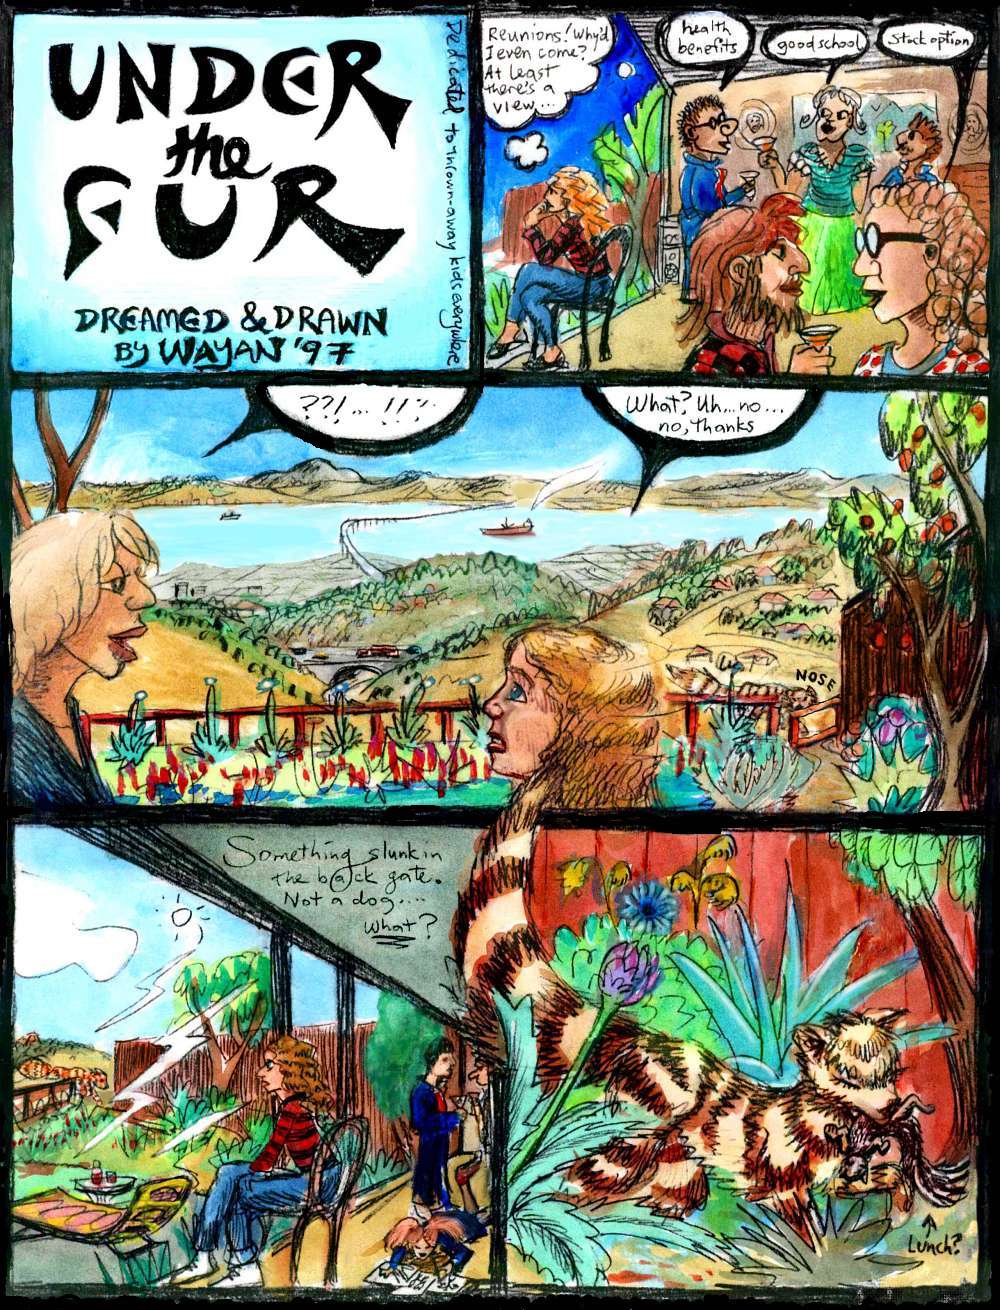 I'm lonely at a reunion and stare out the window. At first I don't spot the strange creature slinking into the yard... Dream comic, 'Under the Fur', p.3, by Wayan.